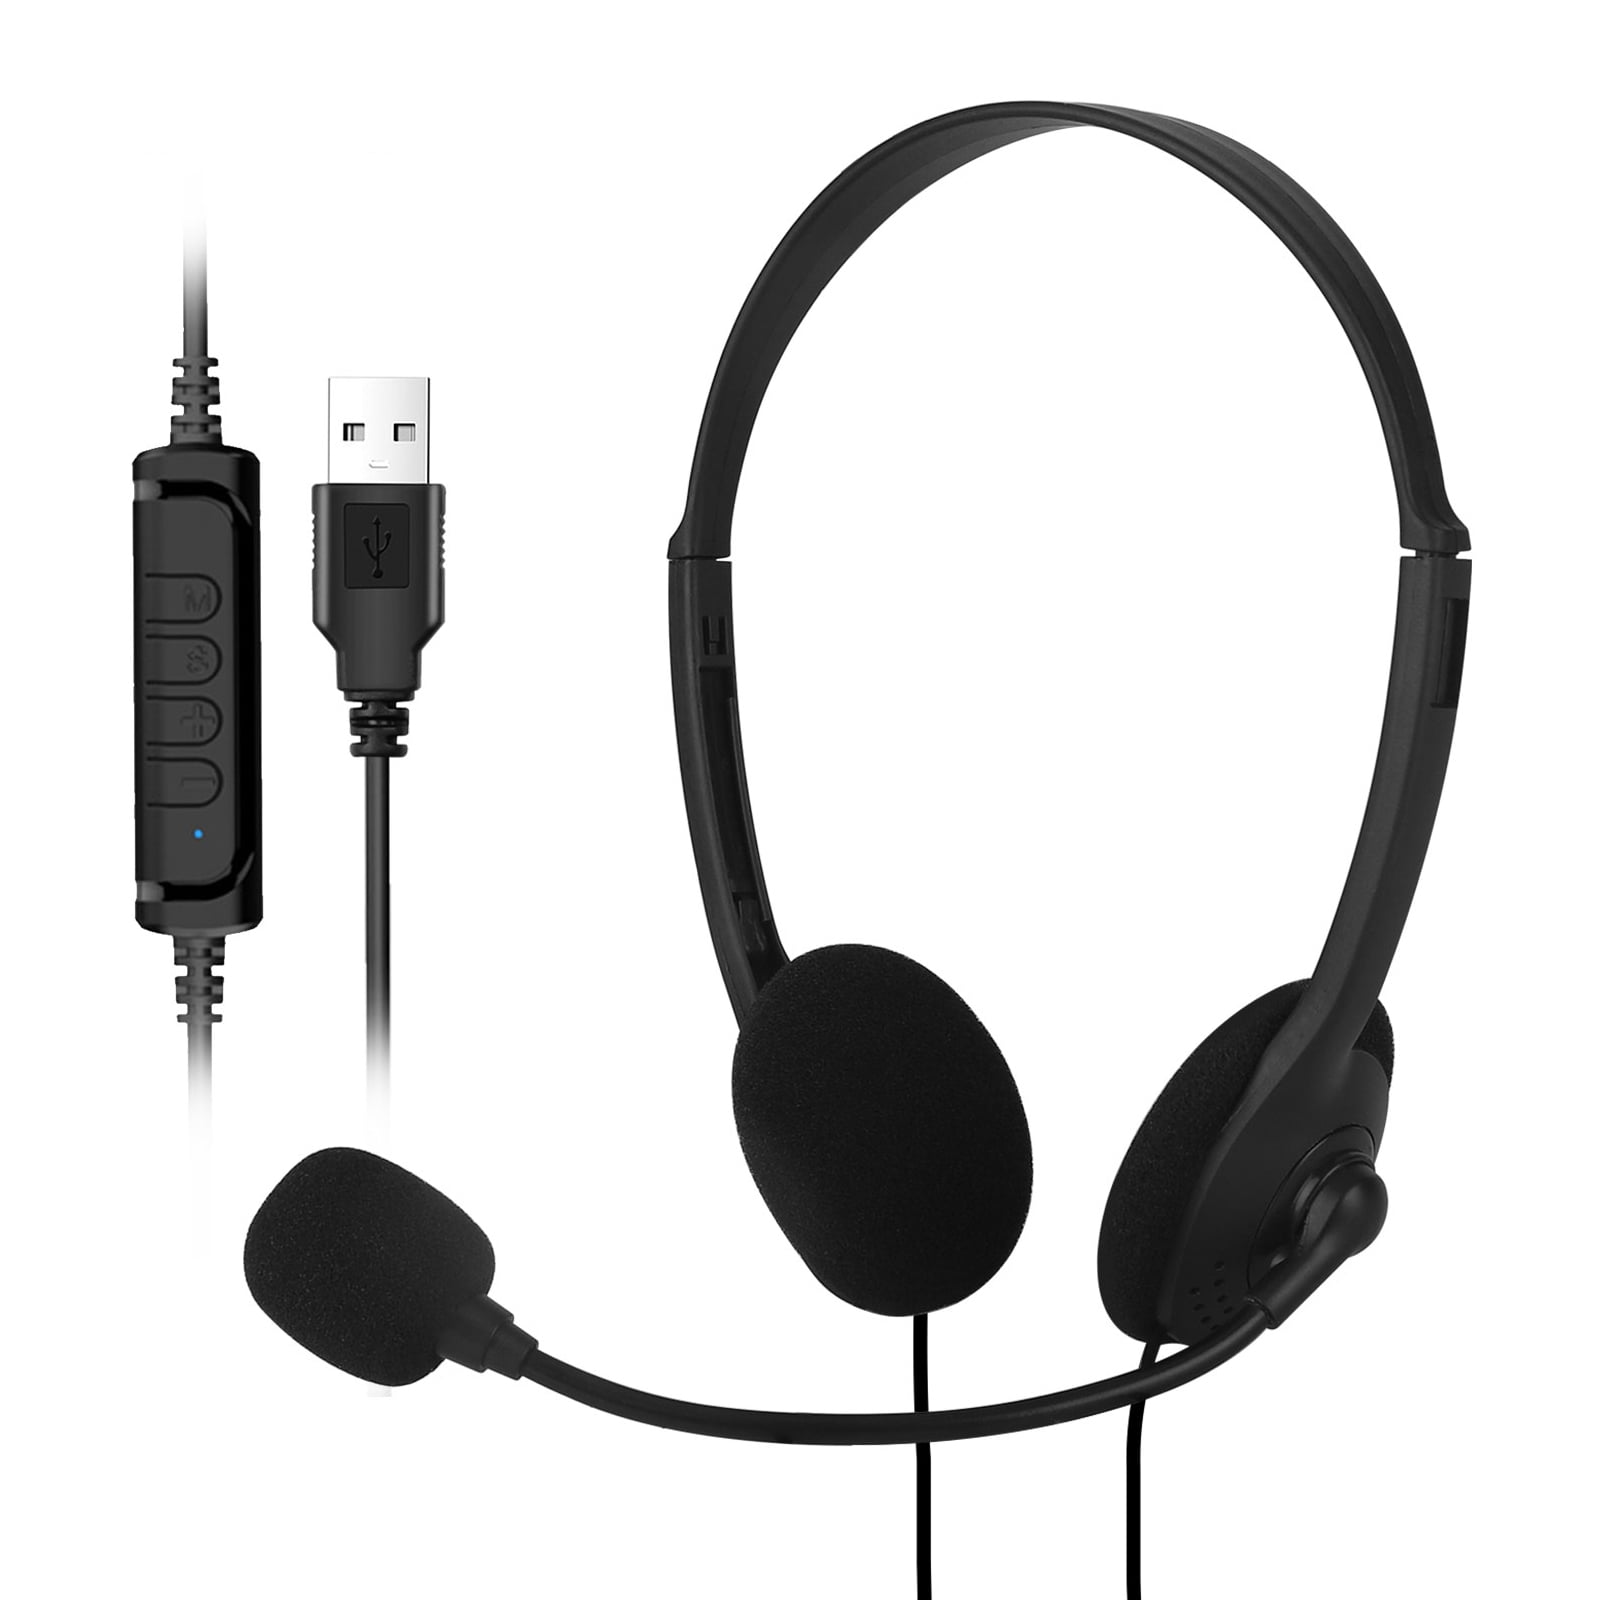 beiyoule USB Headset Computer Headset with Microphone Noise Cancelling Stereo Computer Headset Wired Headphones for PC Laptop Cell Phone Call Center Webinar 